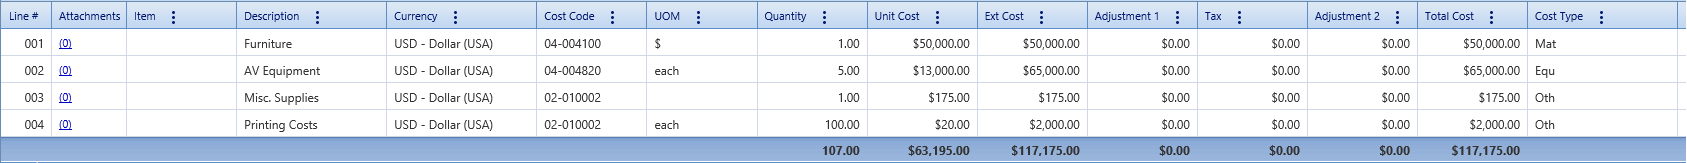 4. Miscellaneous Invoices Details Tab Table